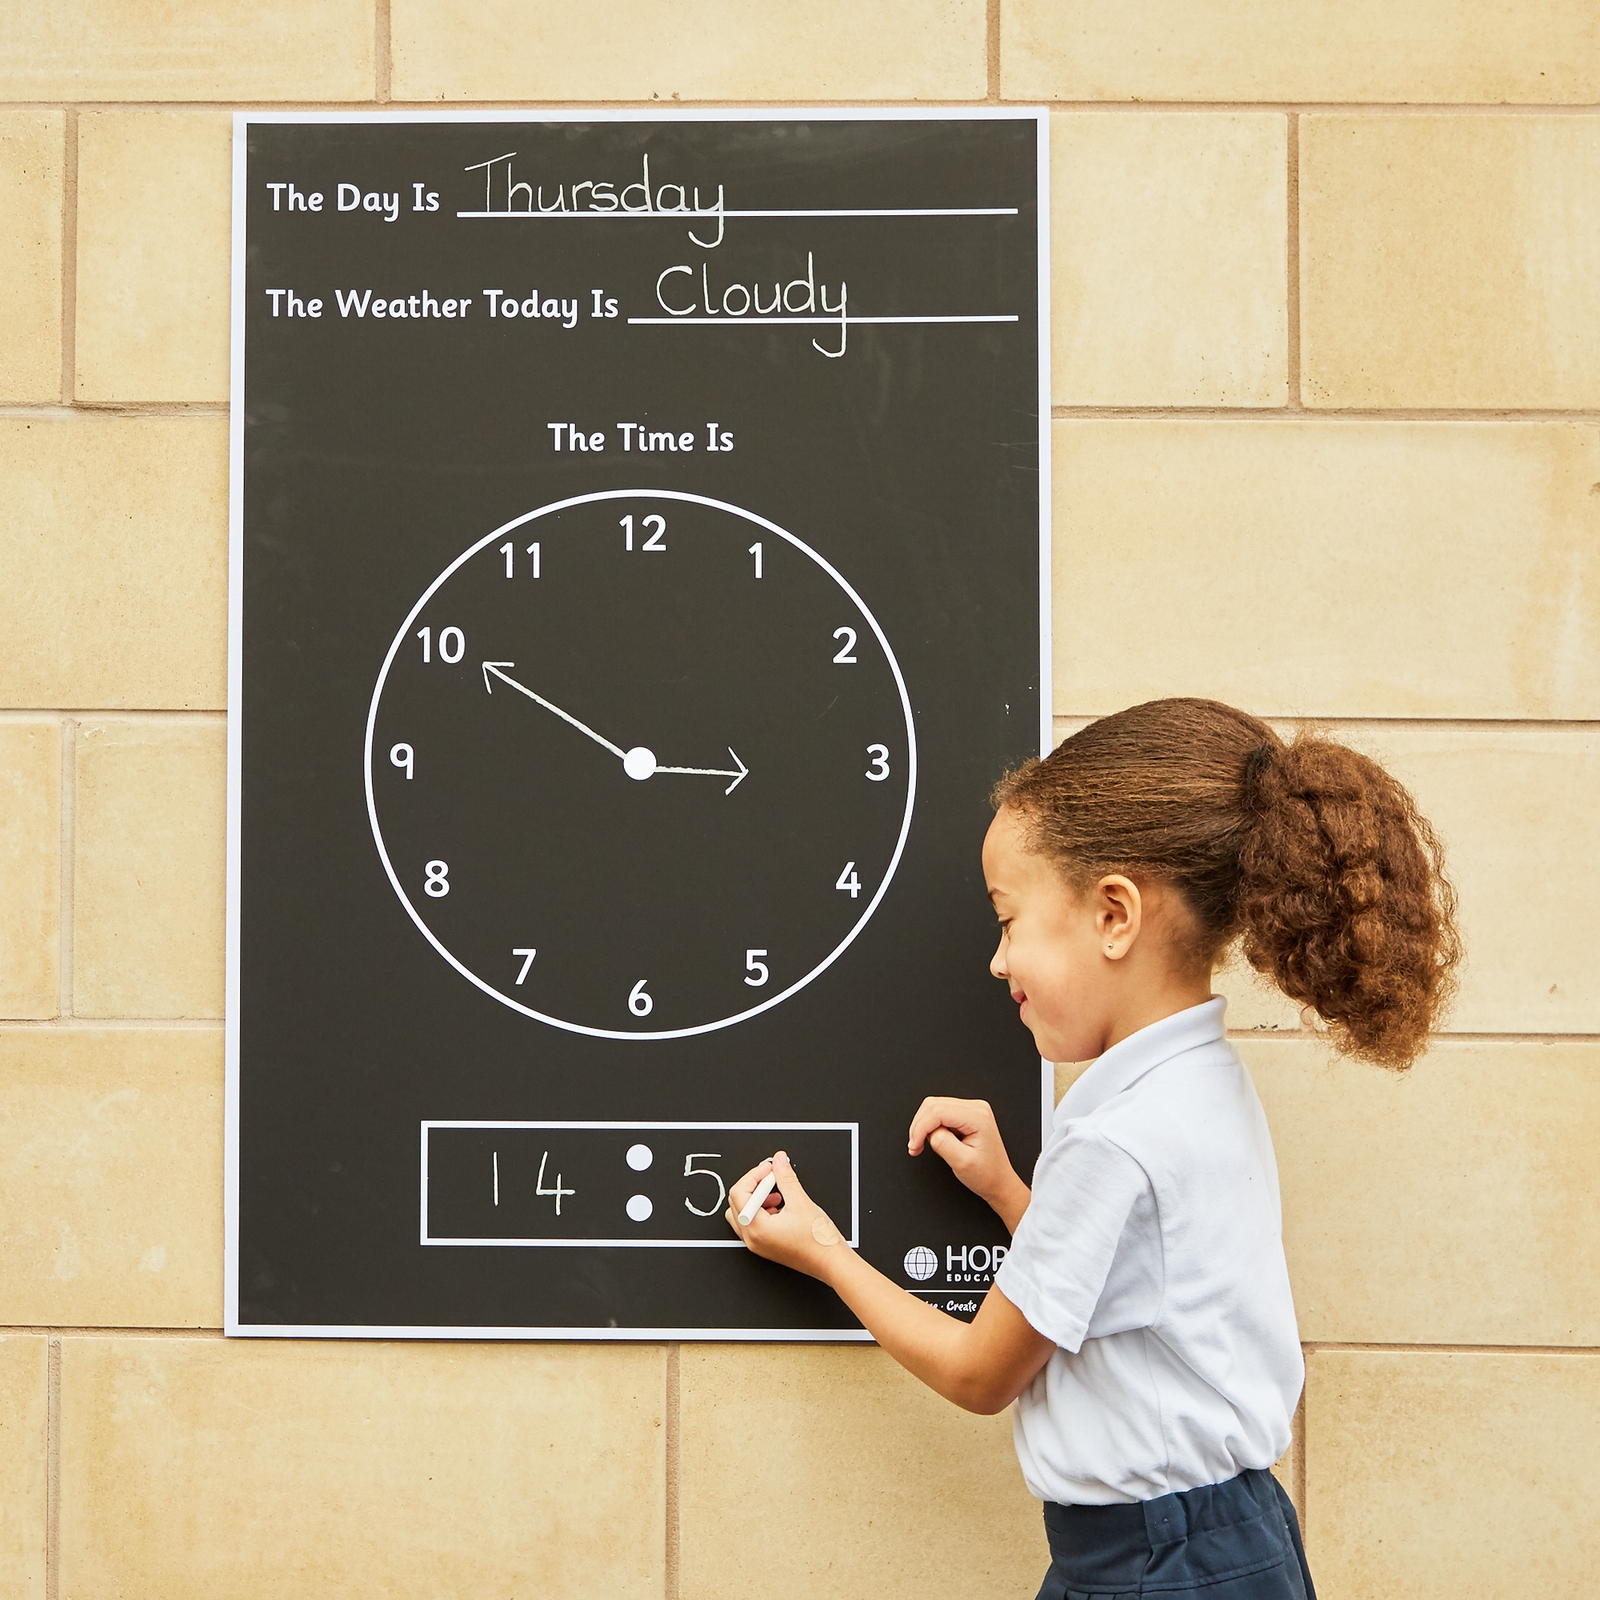 Tell the Time Outdoor Chalkboard